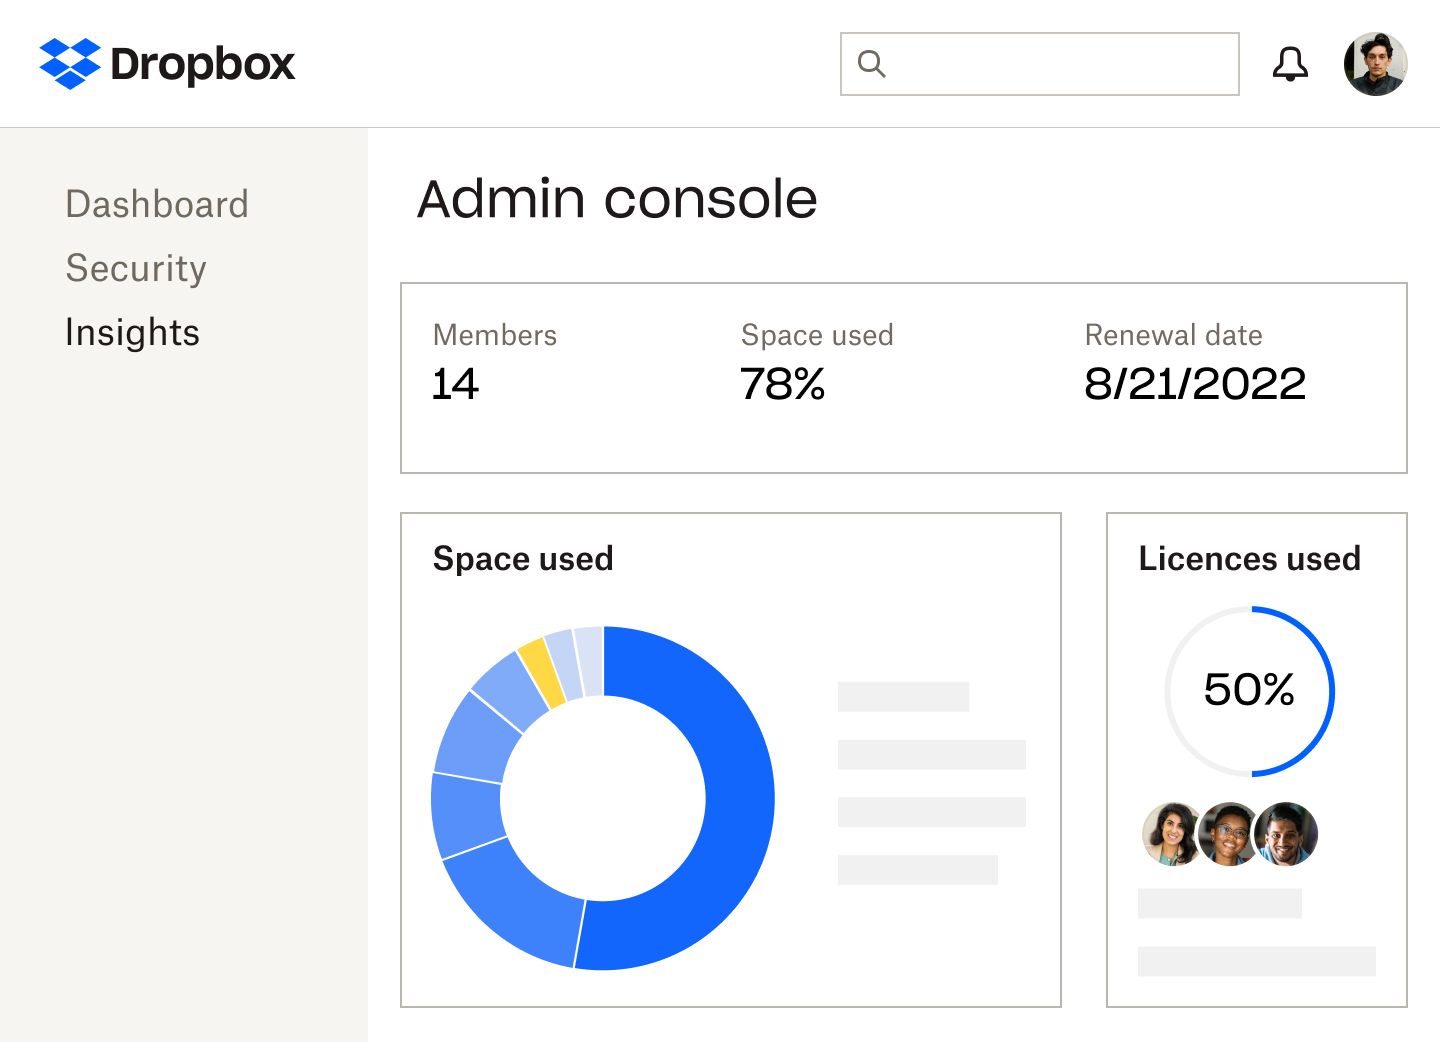 An overview of the Dropbox admin console